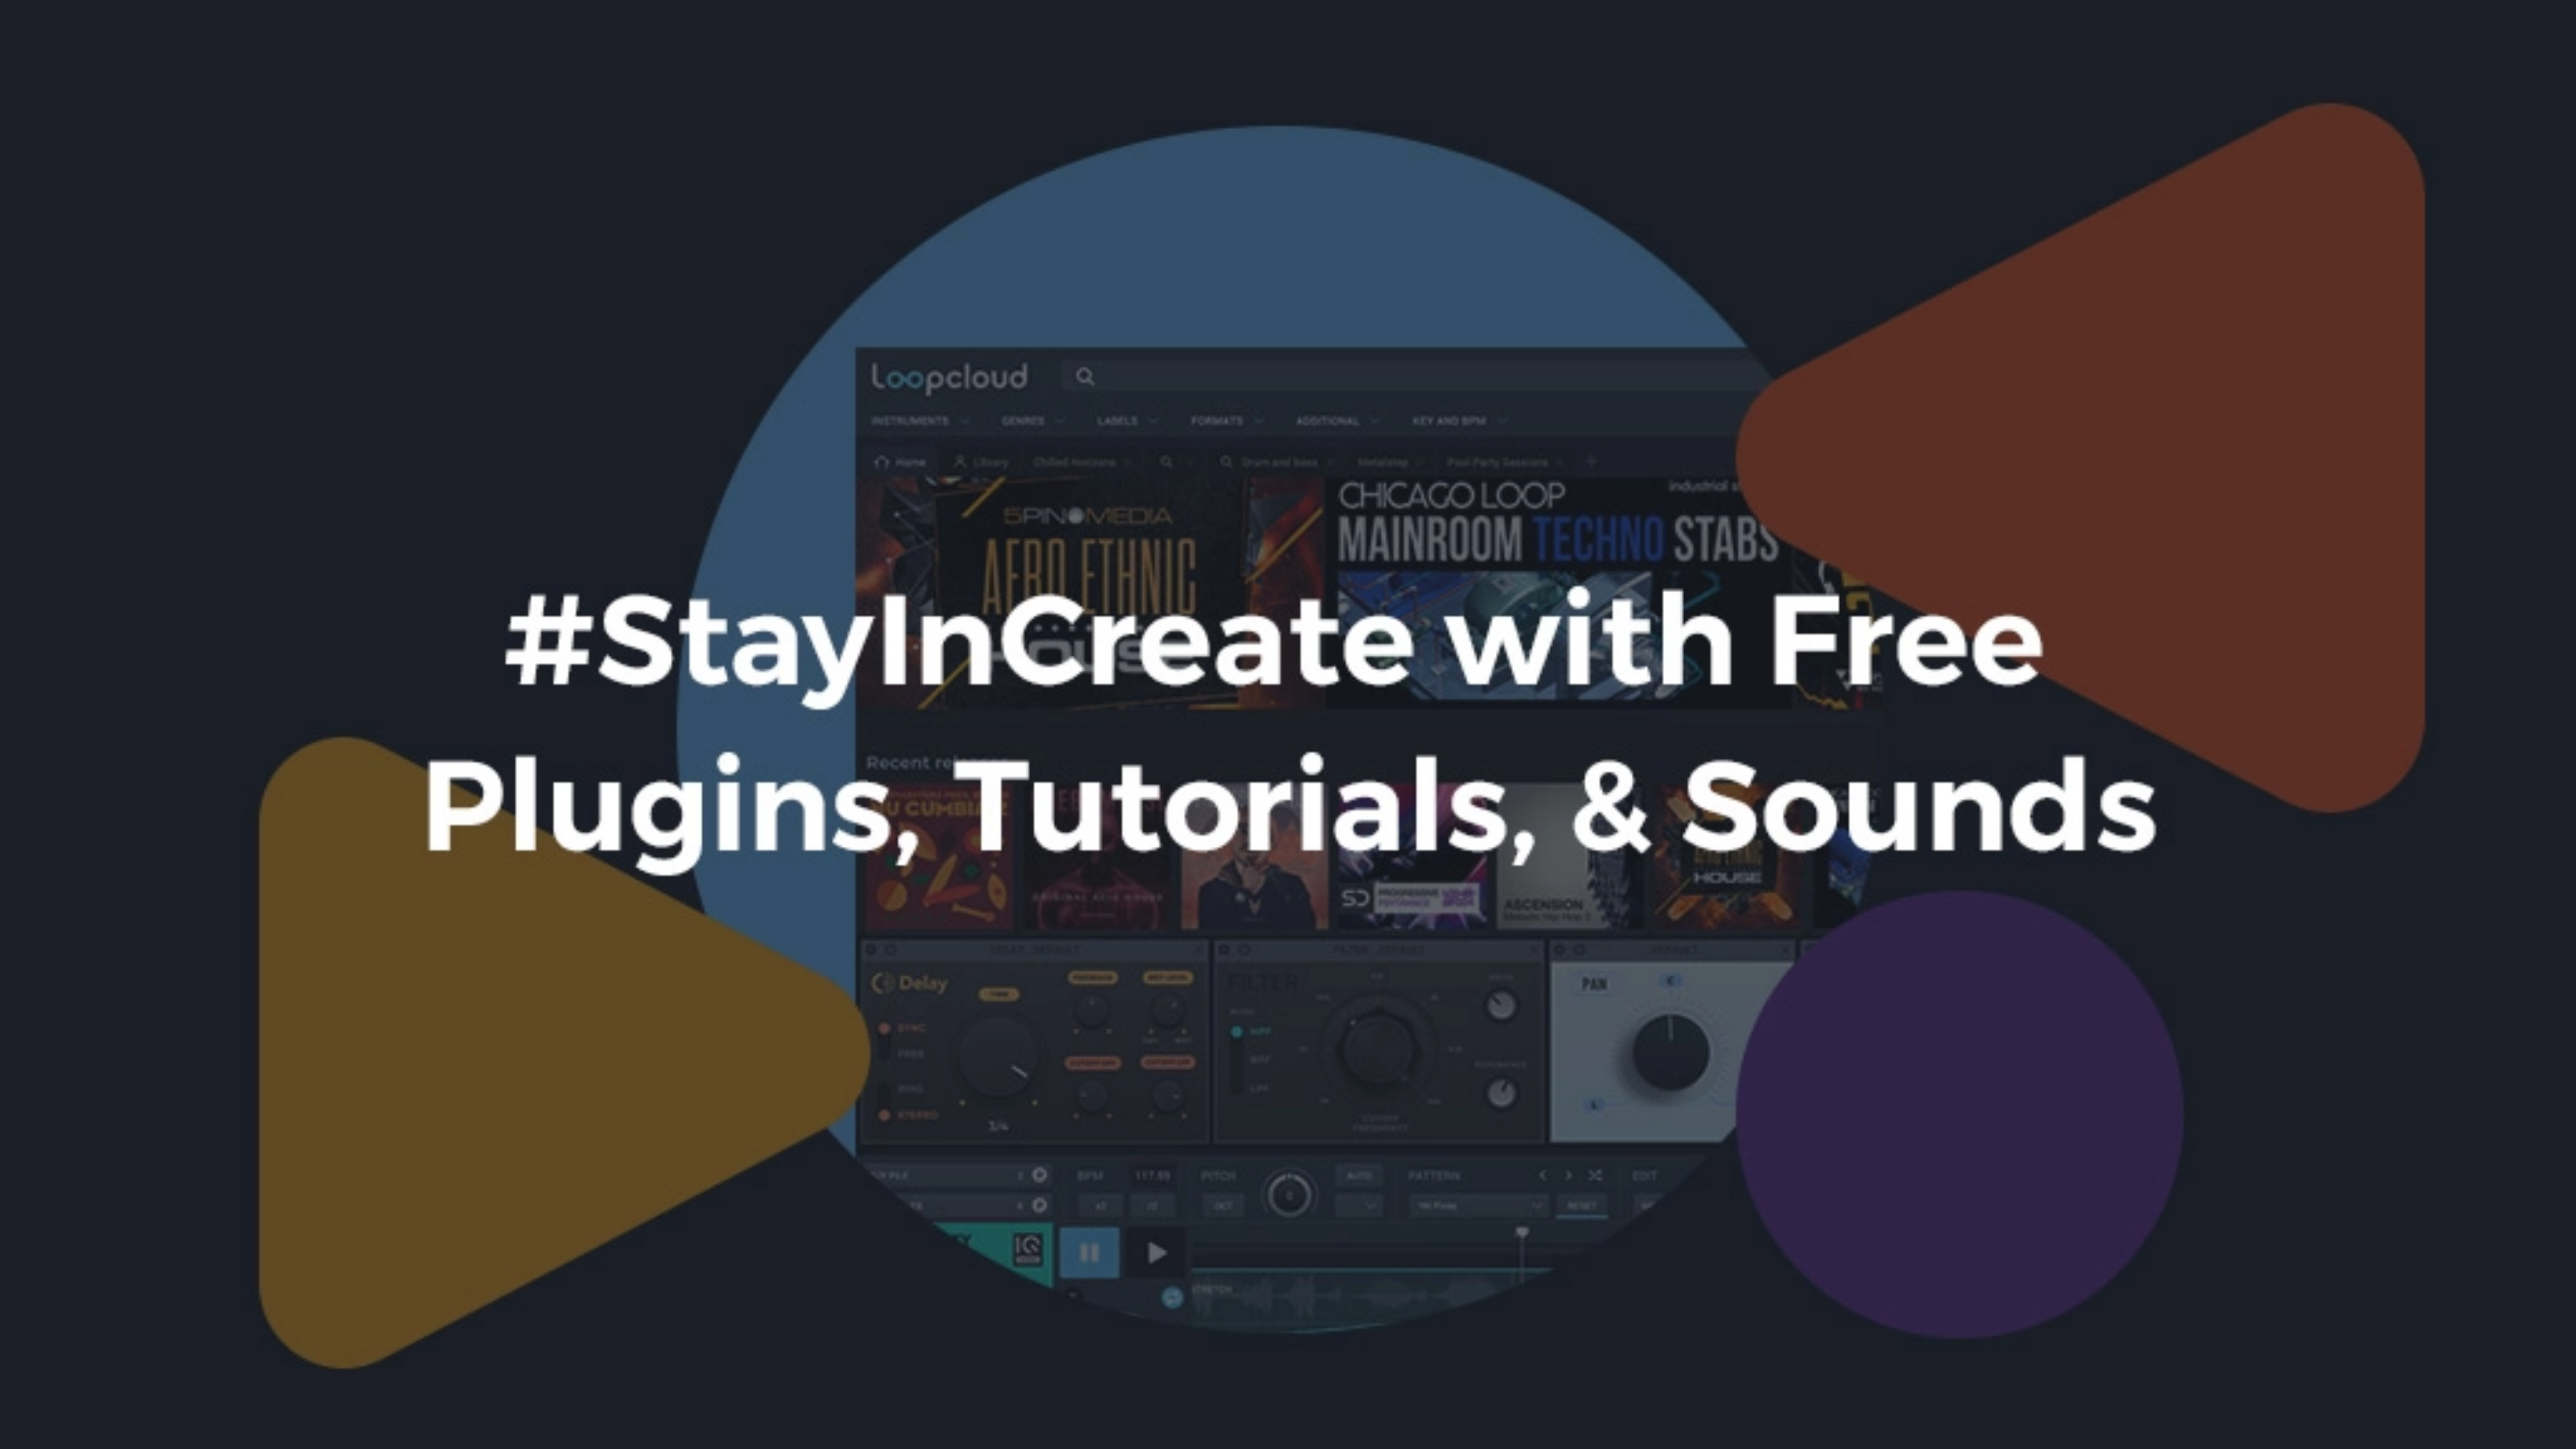 Get free plugins, tutorials and sounds with #StayInCreate